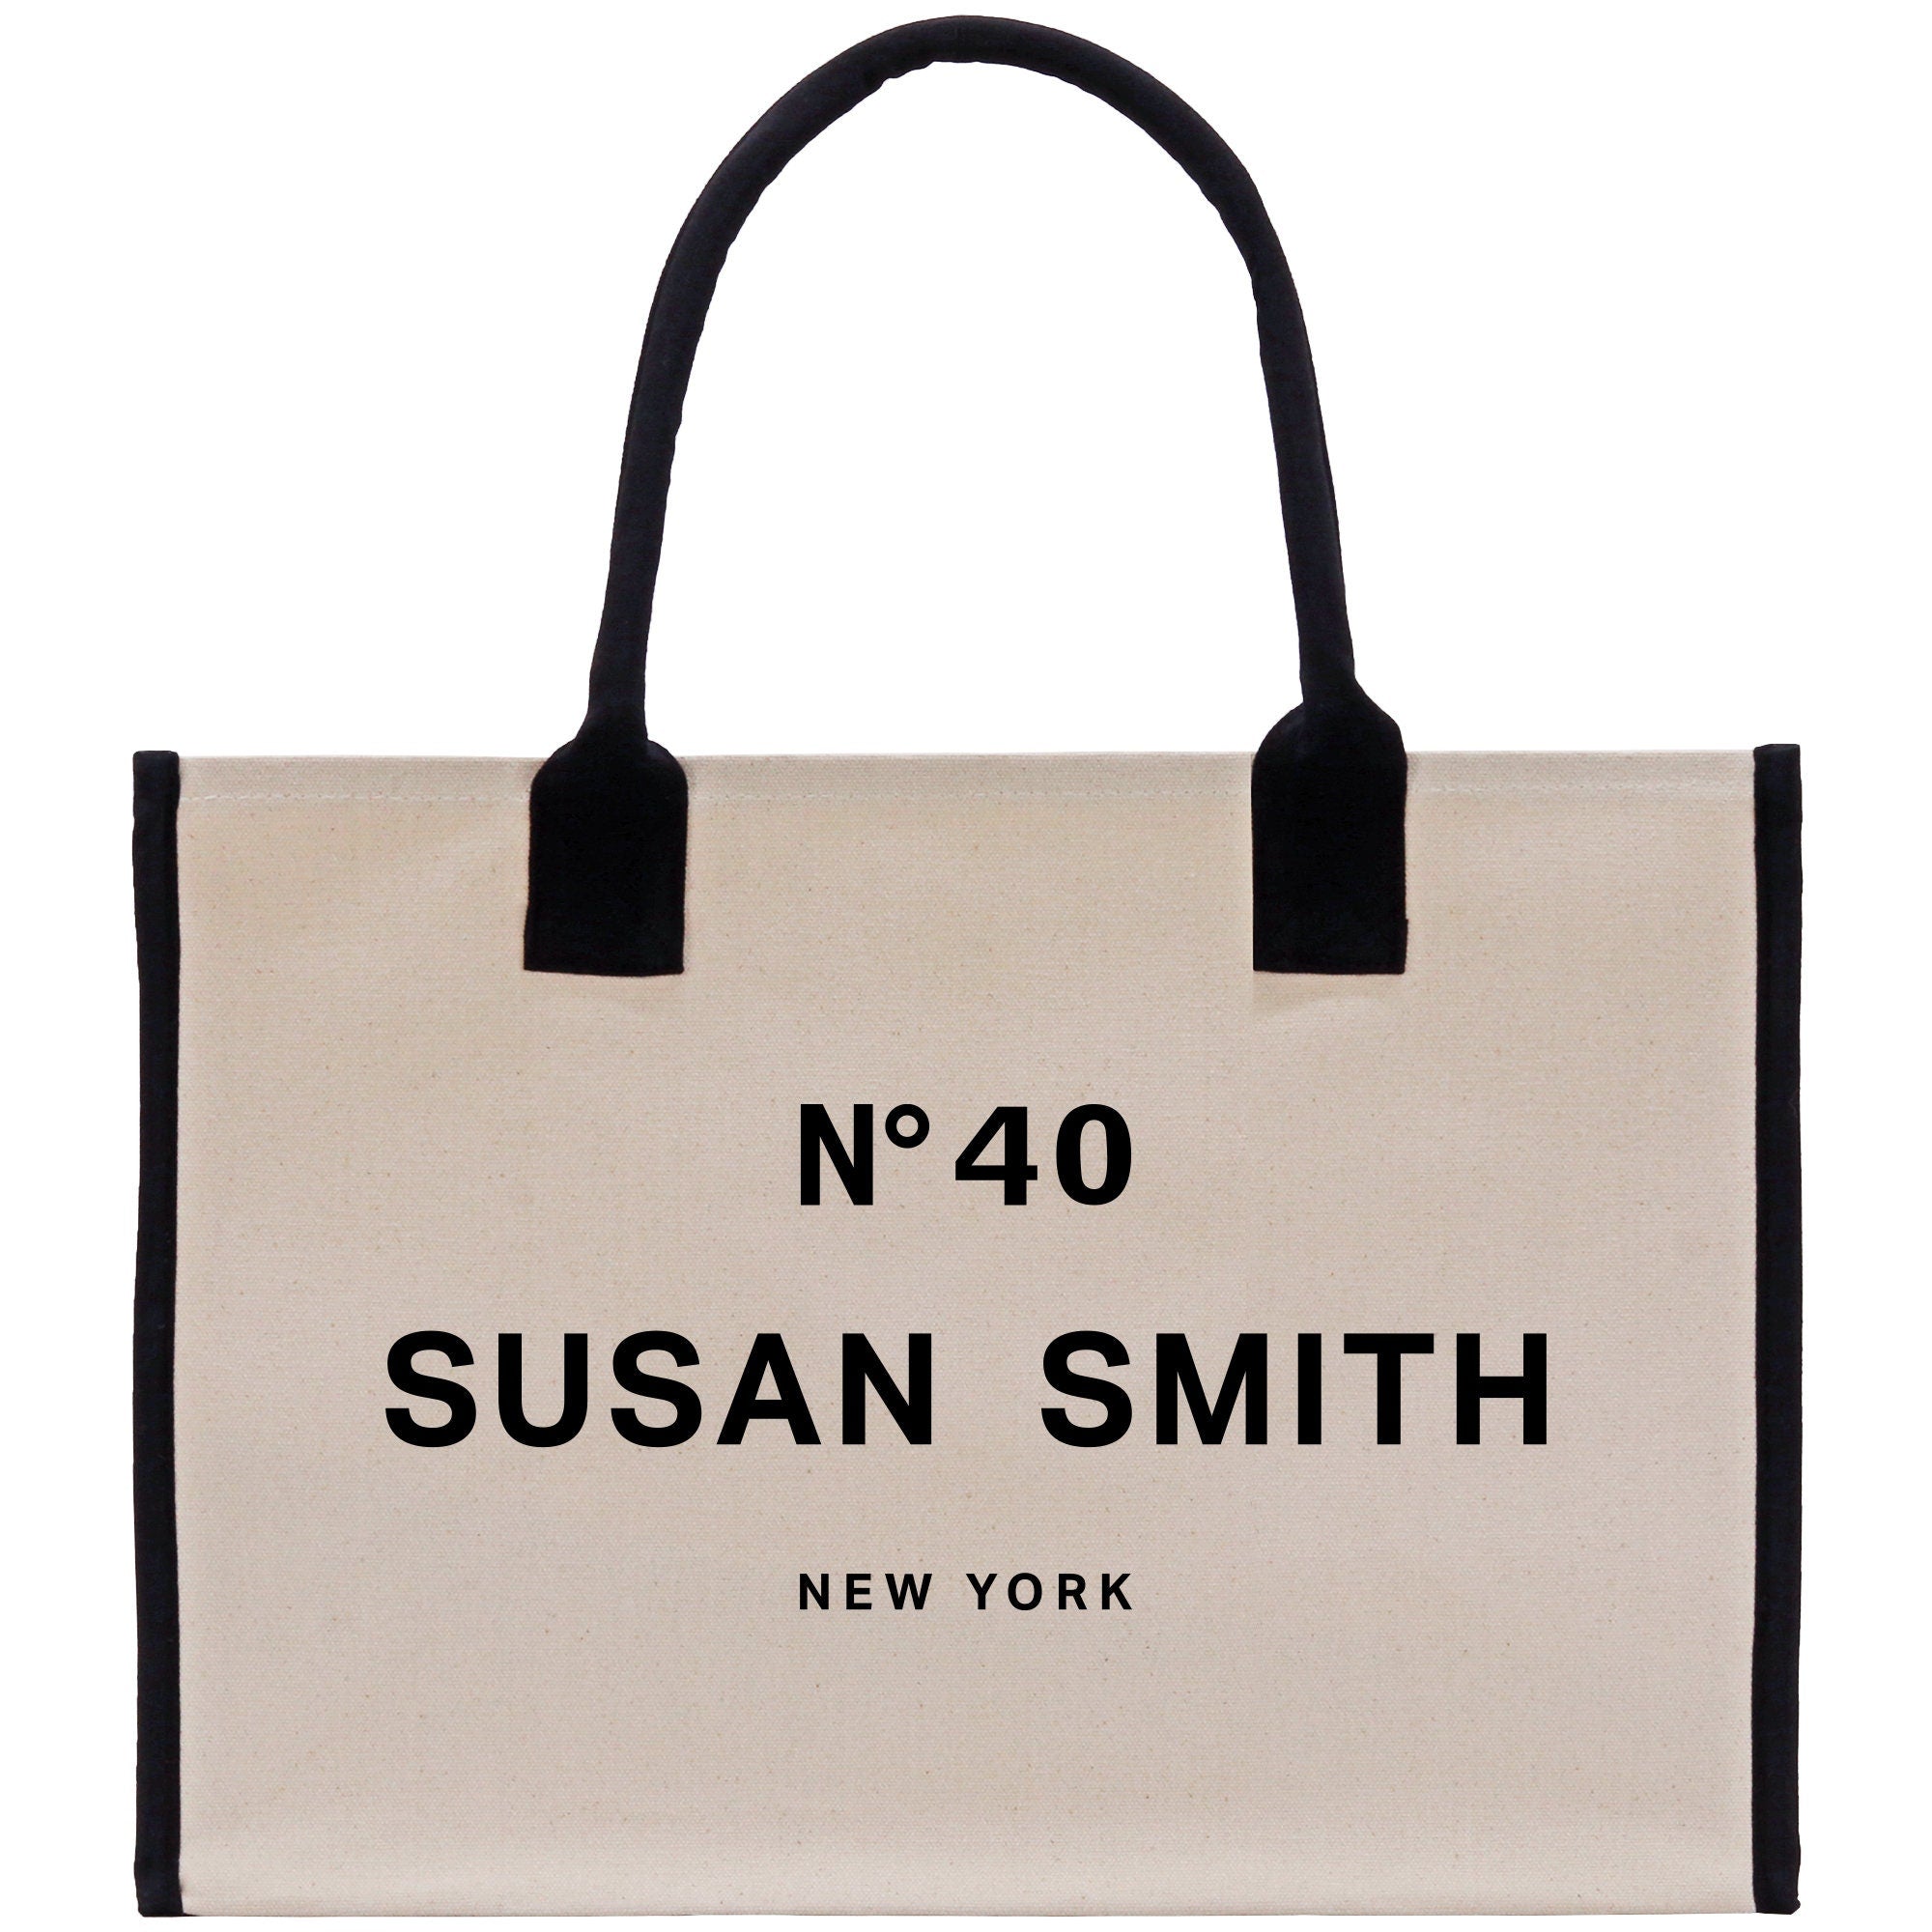 a tote bag with a black and white label on it